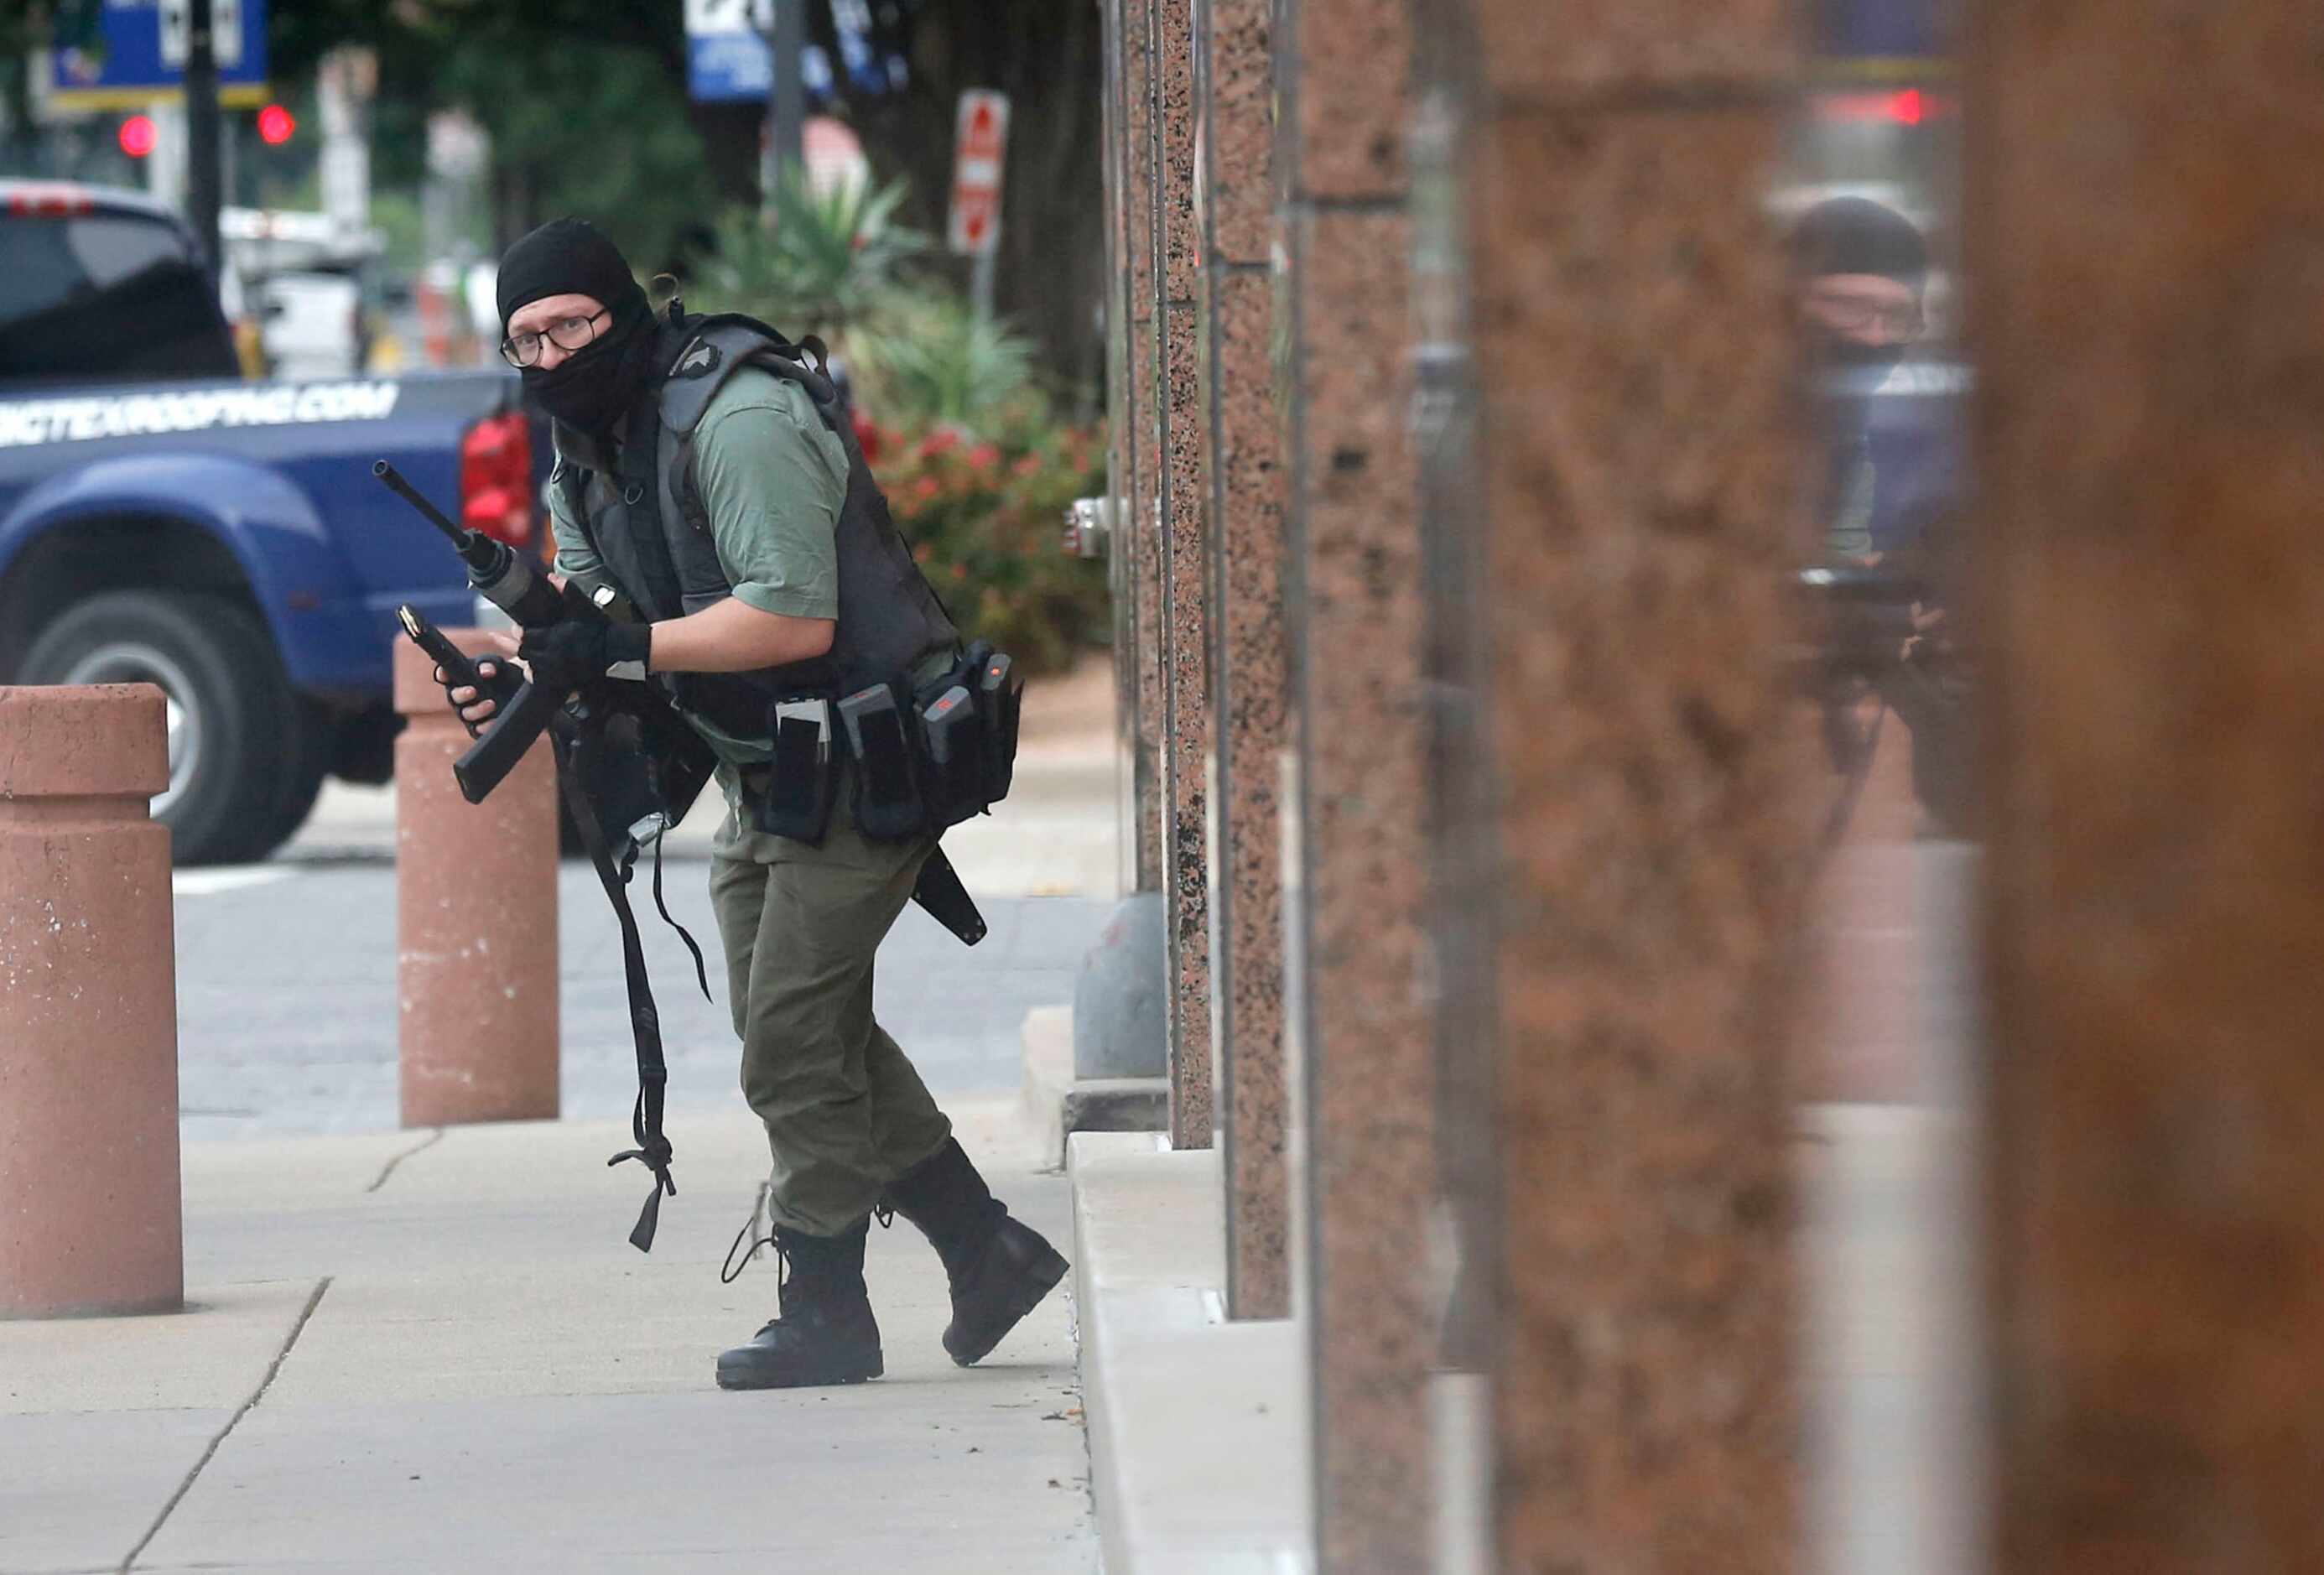 Photographer Tom Fox: As shots rang out near the federal courthouse, I immediately froze at...